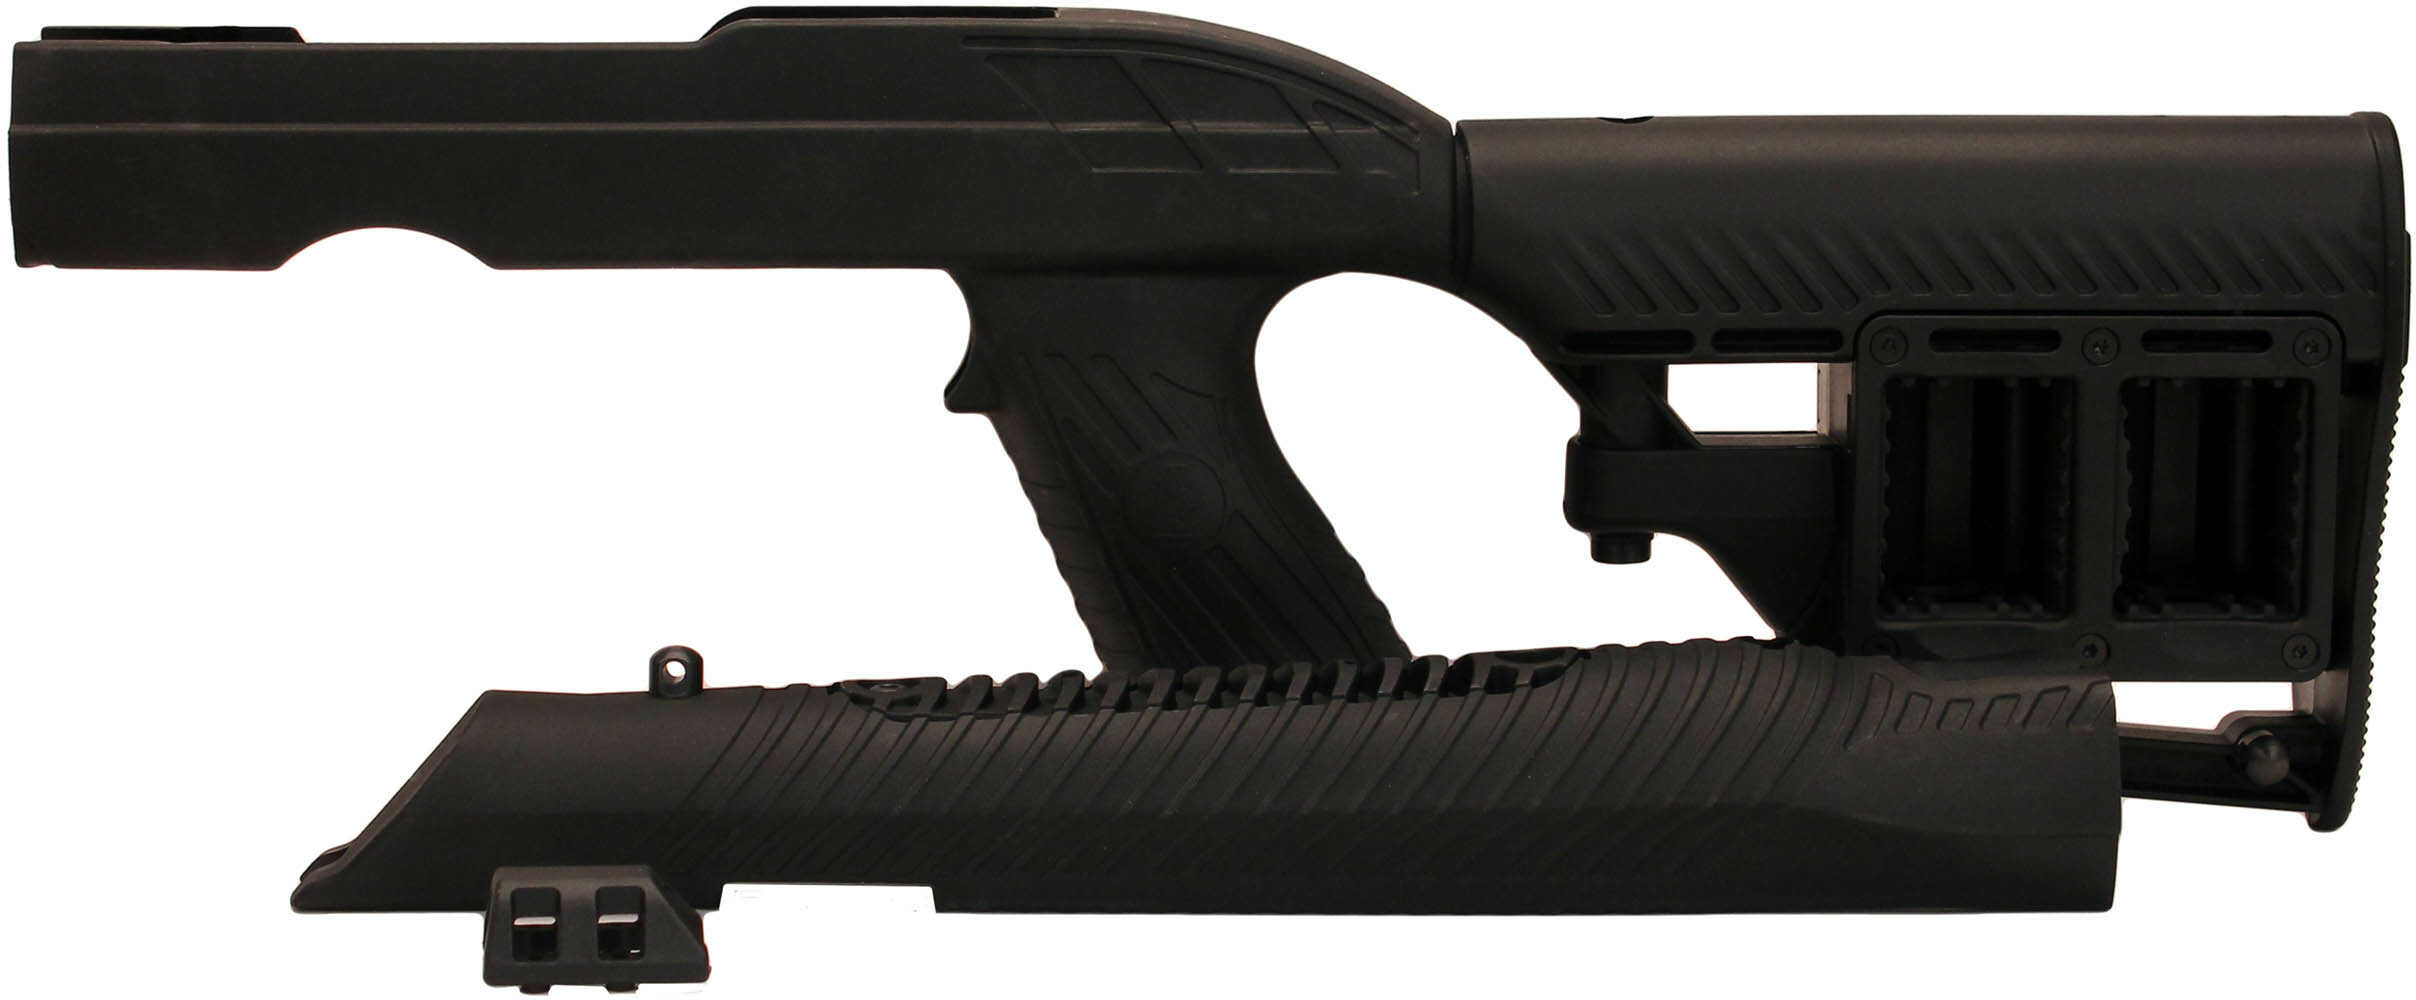 Adaptive Tactical ADTAC 1081054 Rm4 Ruger 10/22 Take Down Stock Black